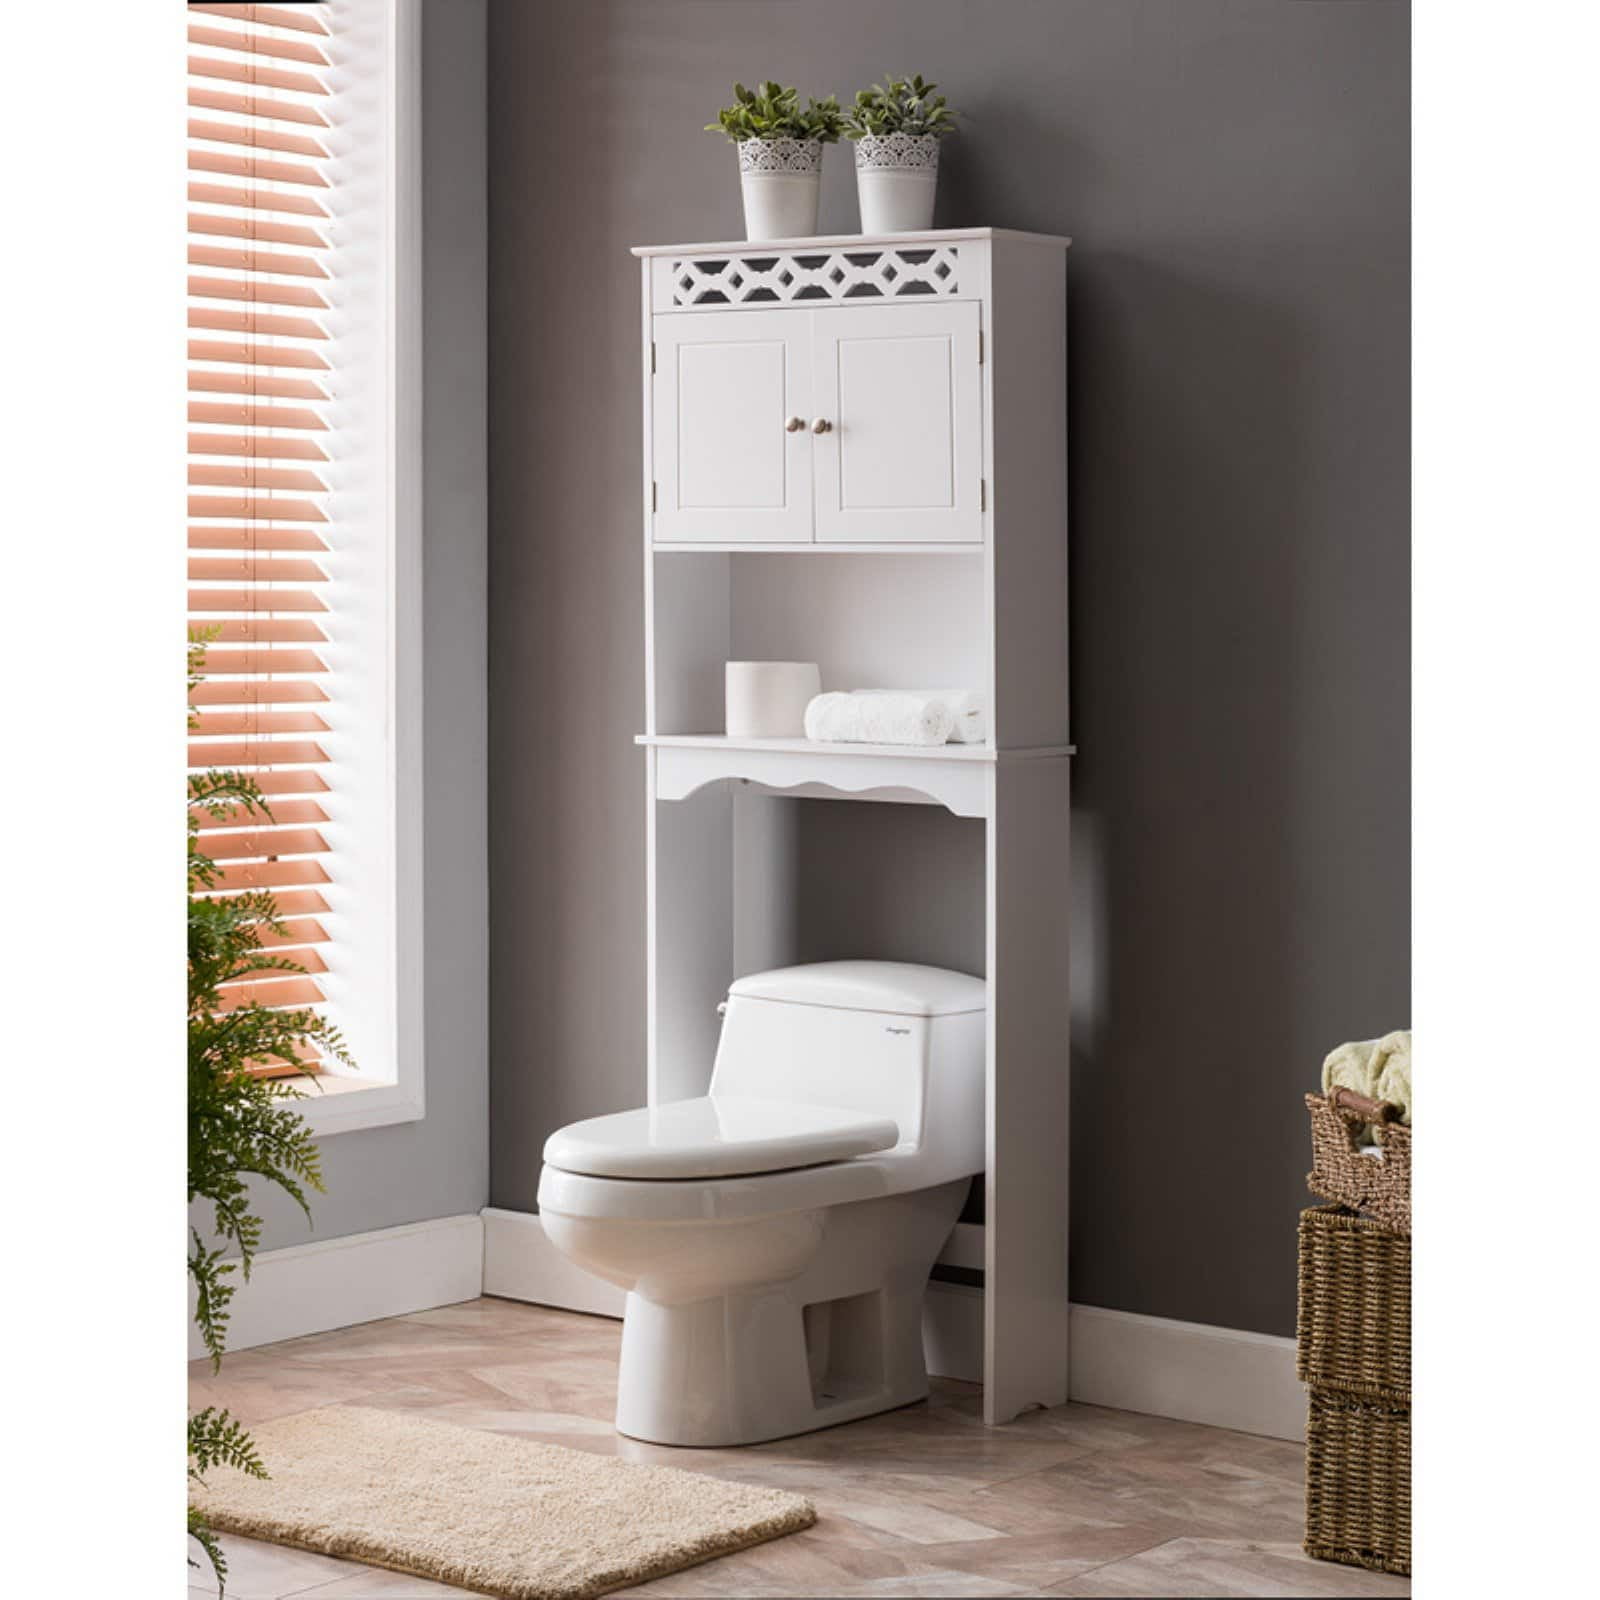 Furniture Bm1133 Wood Bathroom Rack, Solid Wood Free Standing Over The Toilet Storage Cabinet